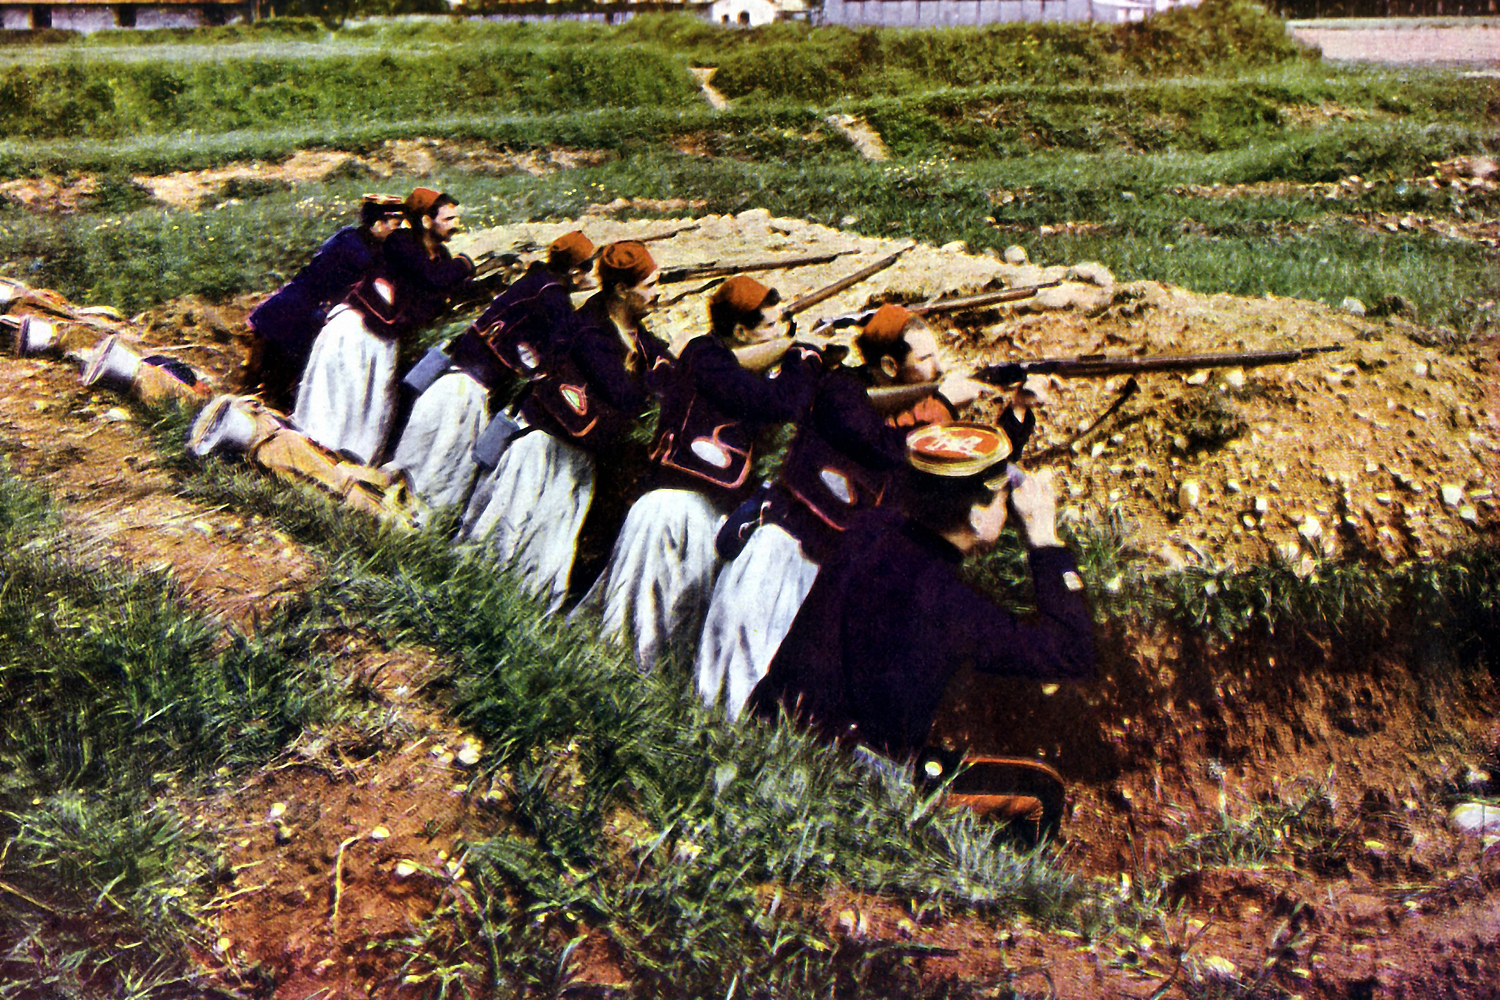 Zouave infantry troops of the French army at Barcy, France during the Battle of the Marne, September 1914.